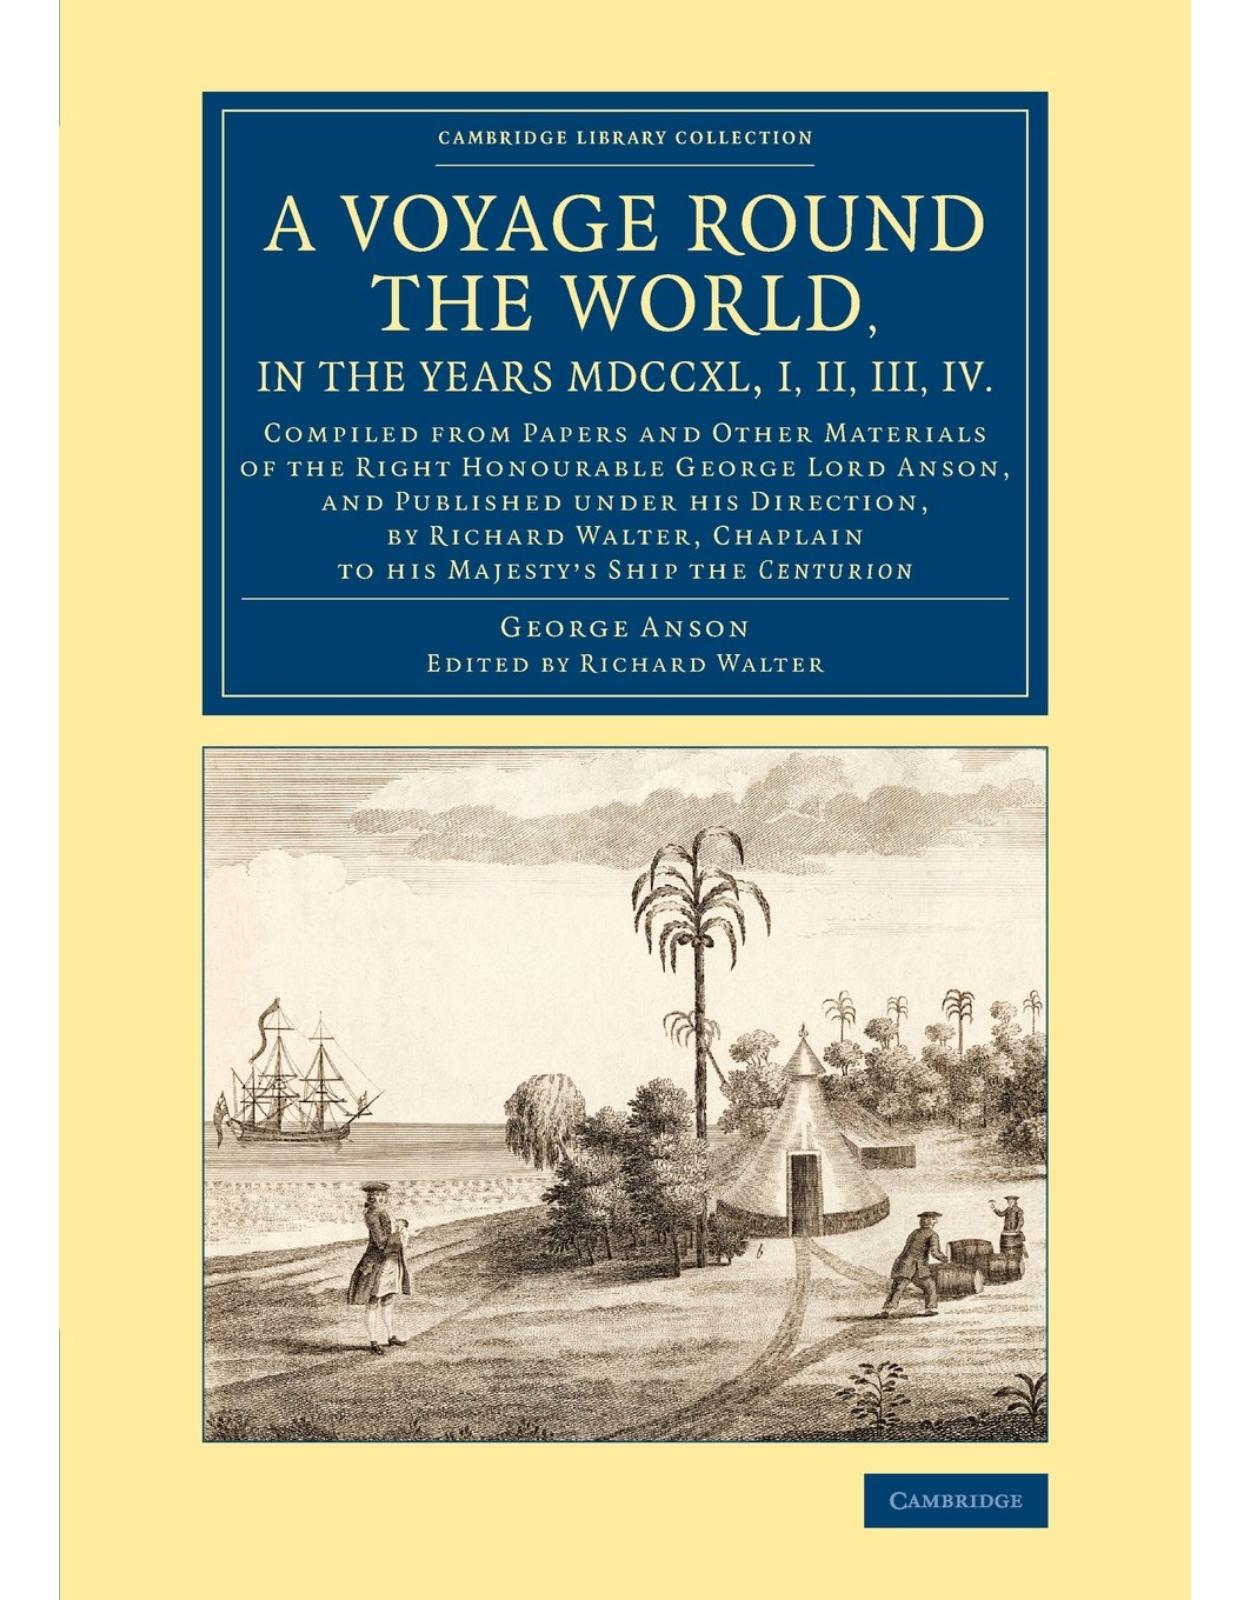 A Voyage round the World, in the Years MDCCXL, I, II, III, IV: Compiled from Papers and Other Materials of the Right Honourable George Lord Anson, and ... Library Collection - Maritime Exploration)